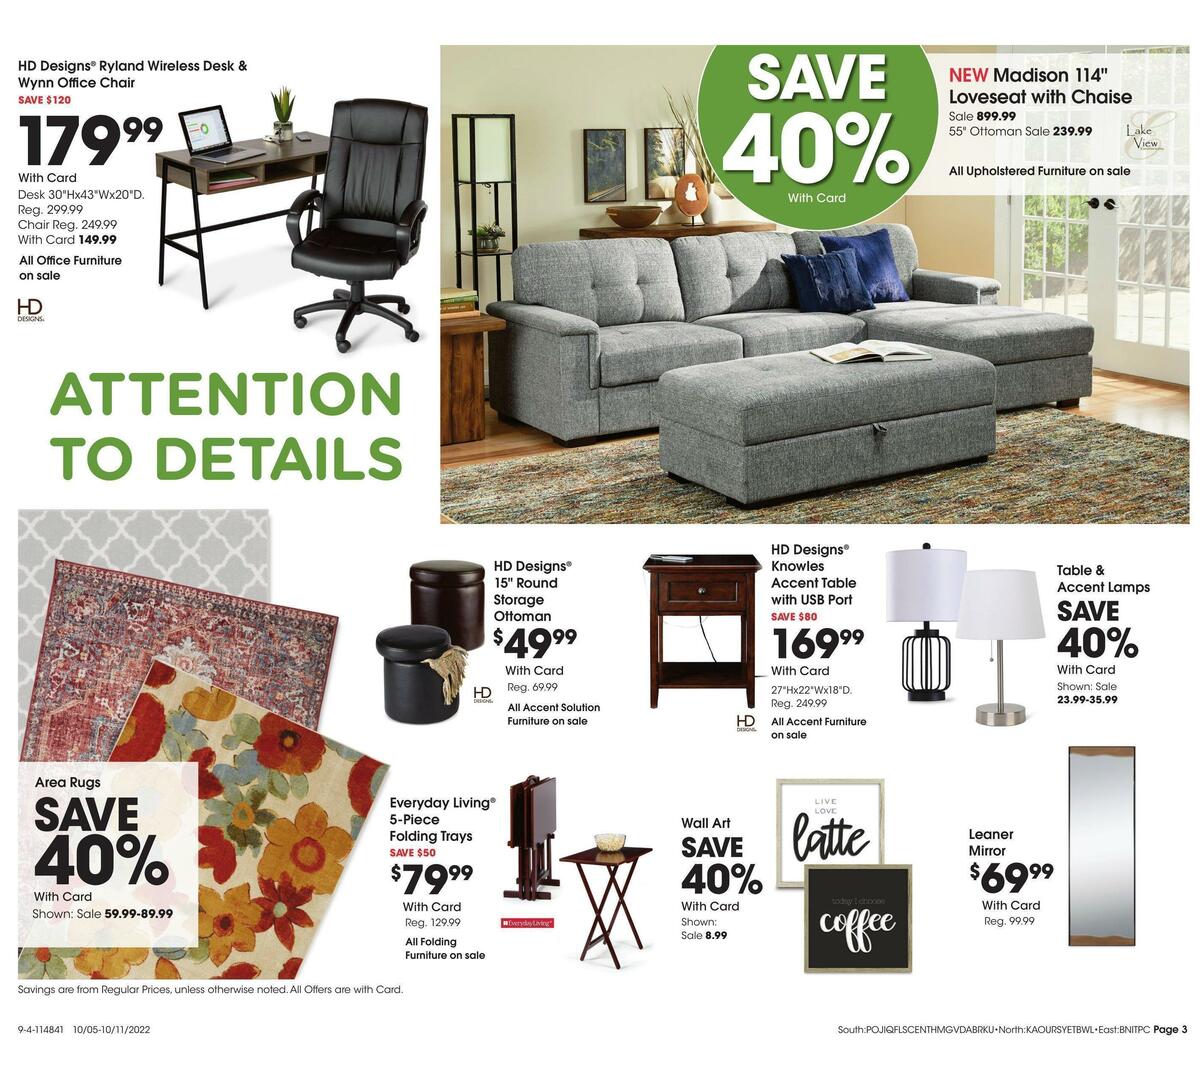 Fred Meyer General Merchandise Weekly Ad from October 5